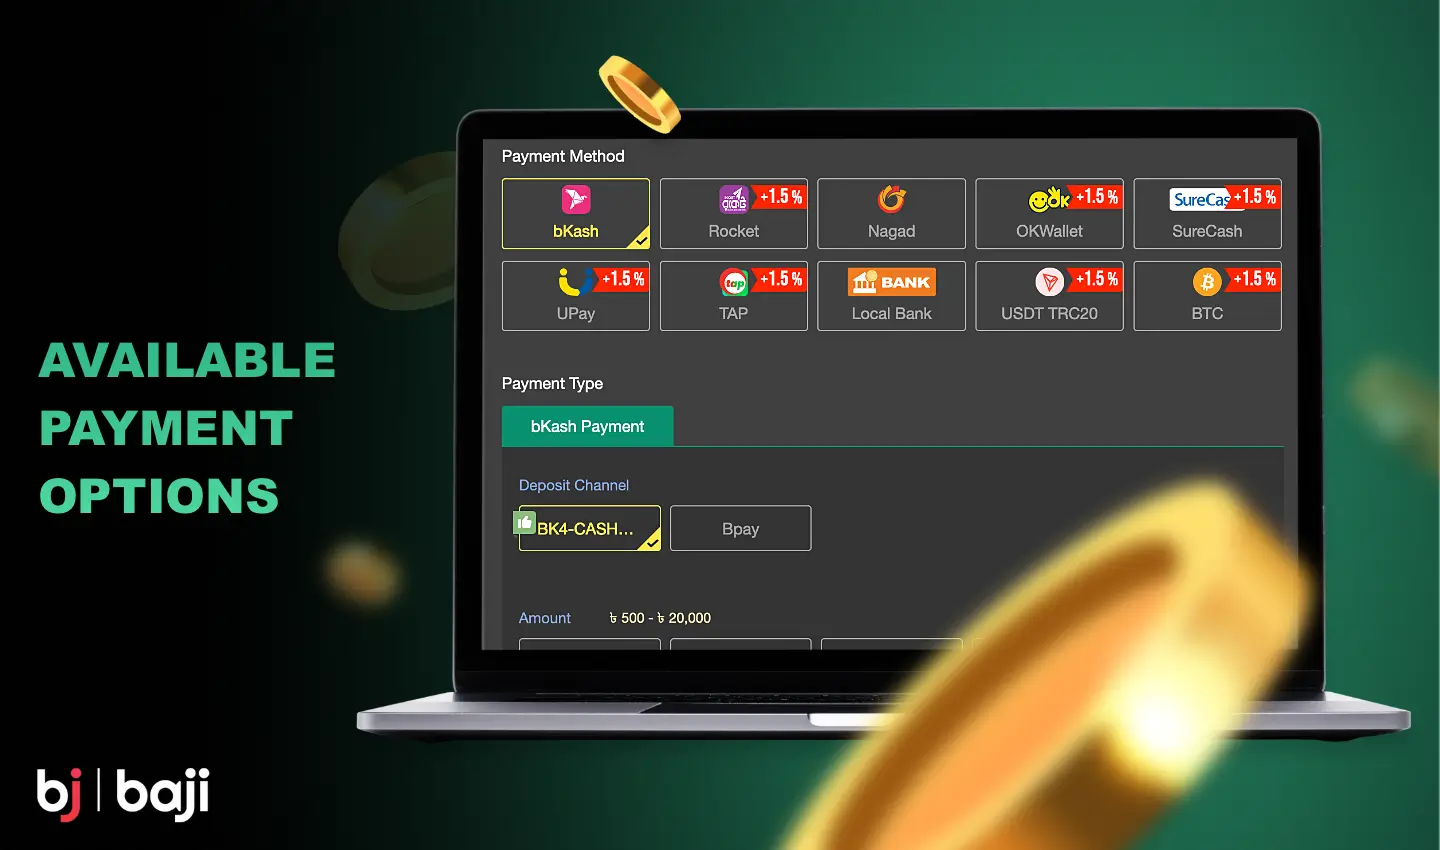 You can make a deposit or withdraw your winnings from Baji 666 using one of the available payment methods